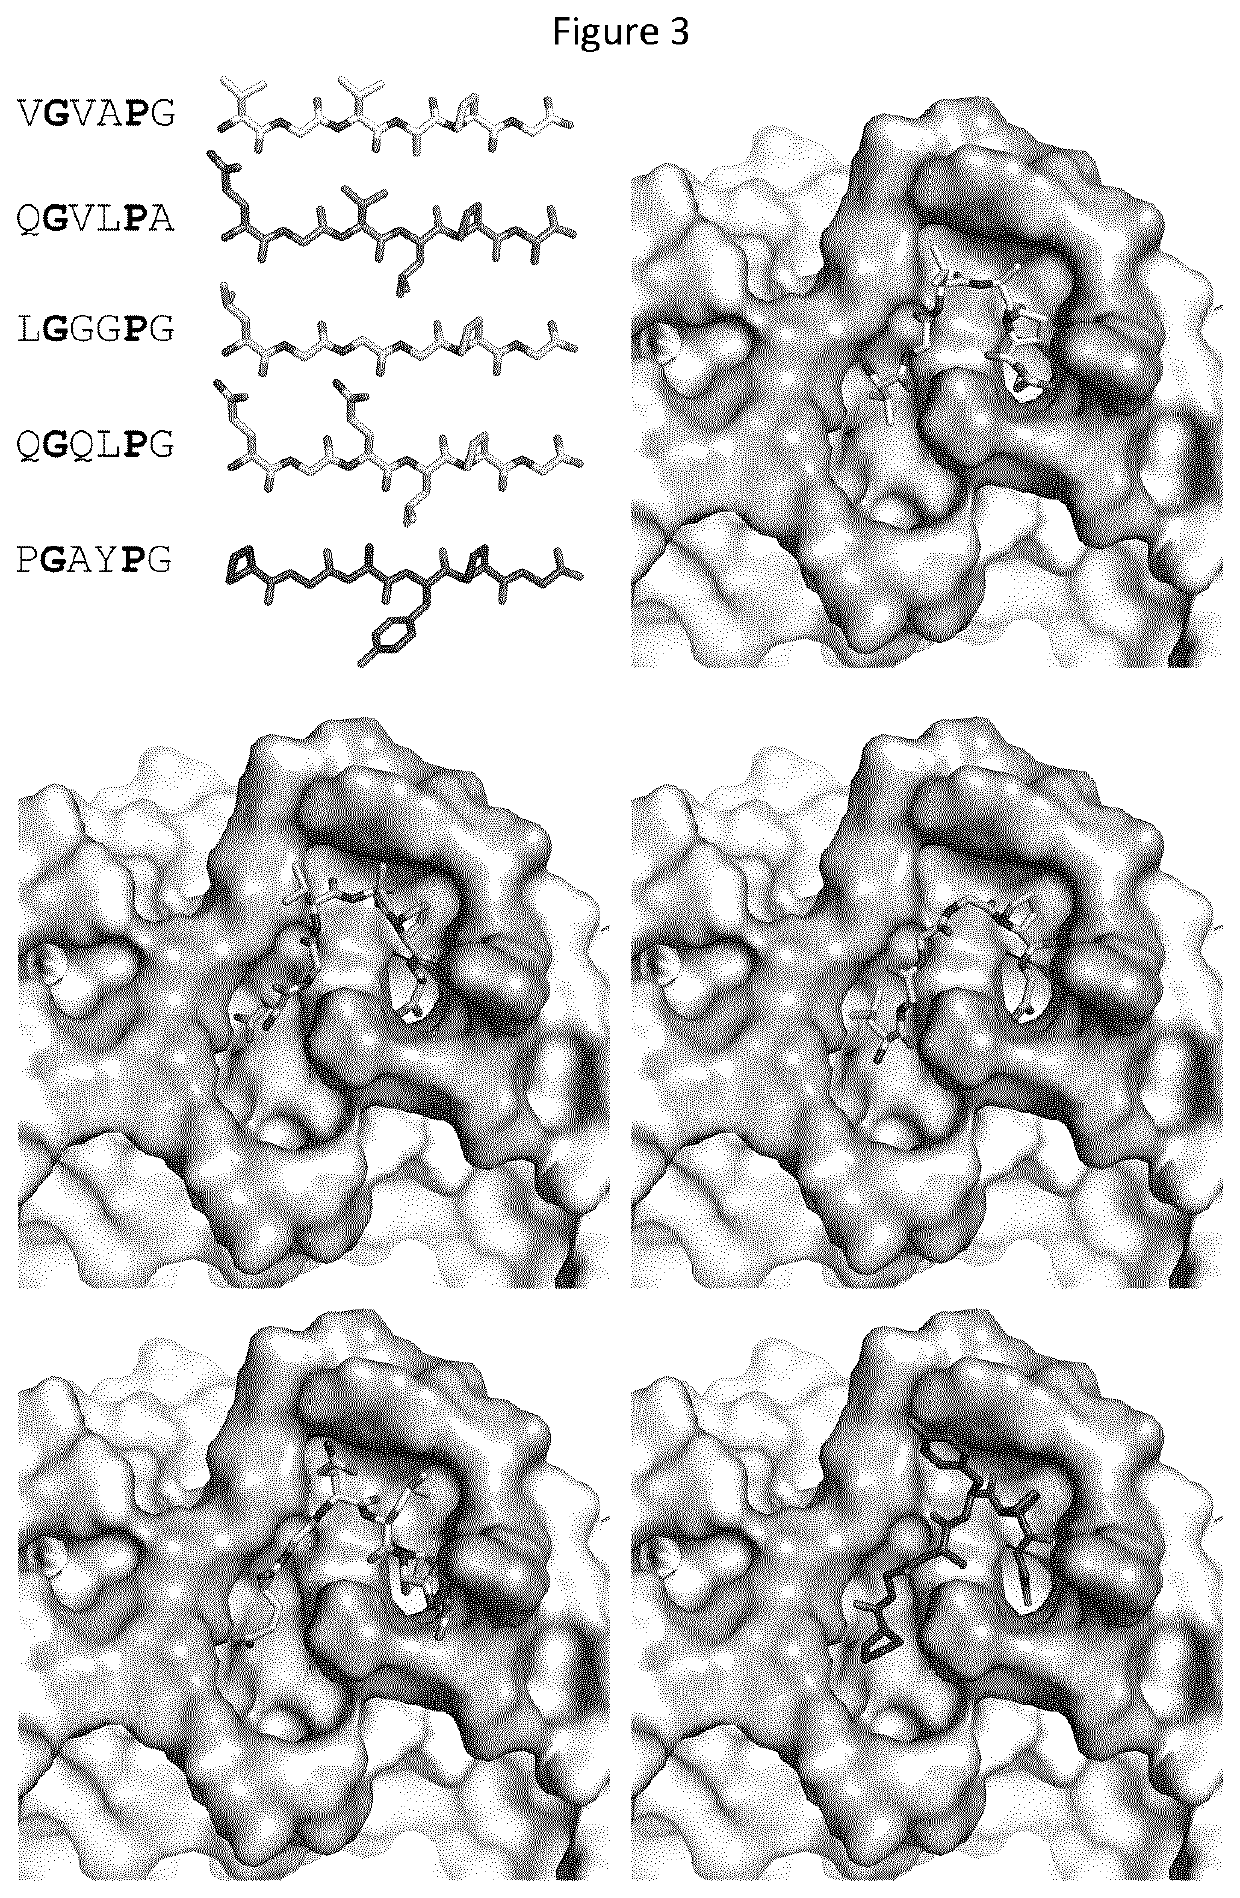 Peptide modulators of the interaction between human c-peptide and human elastin receptor for therapeutic use